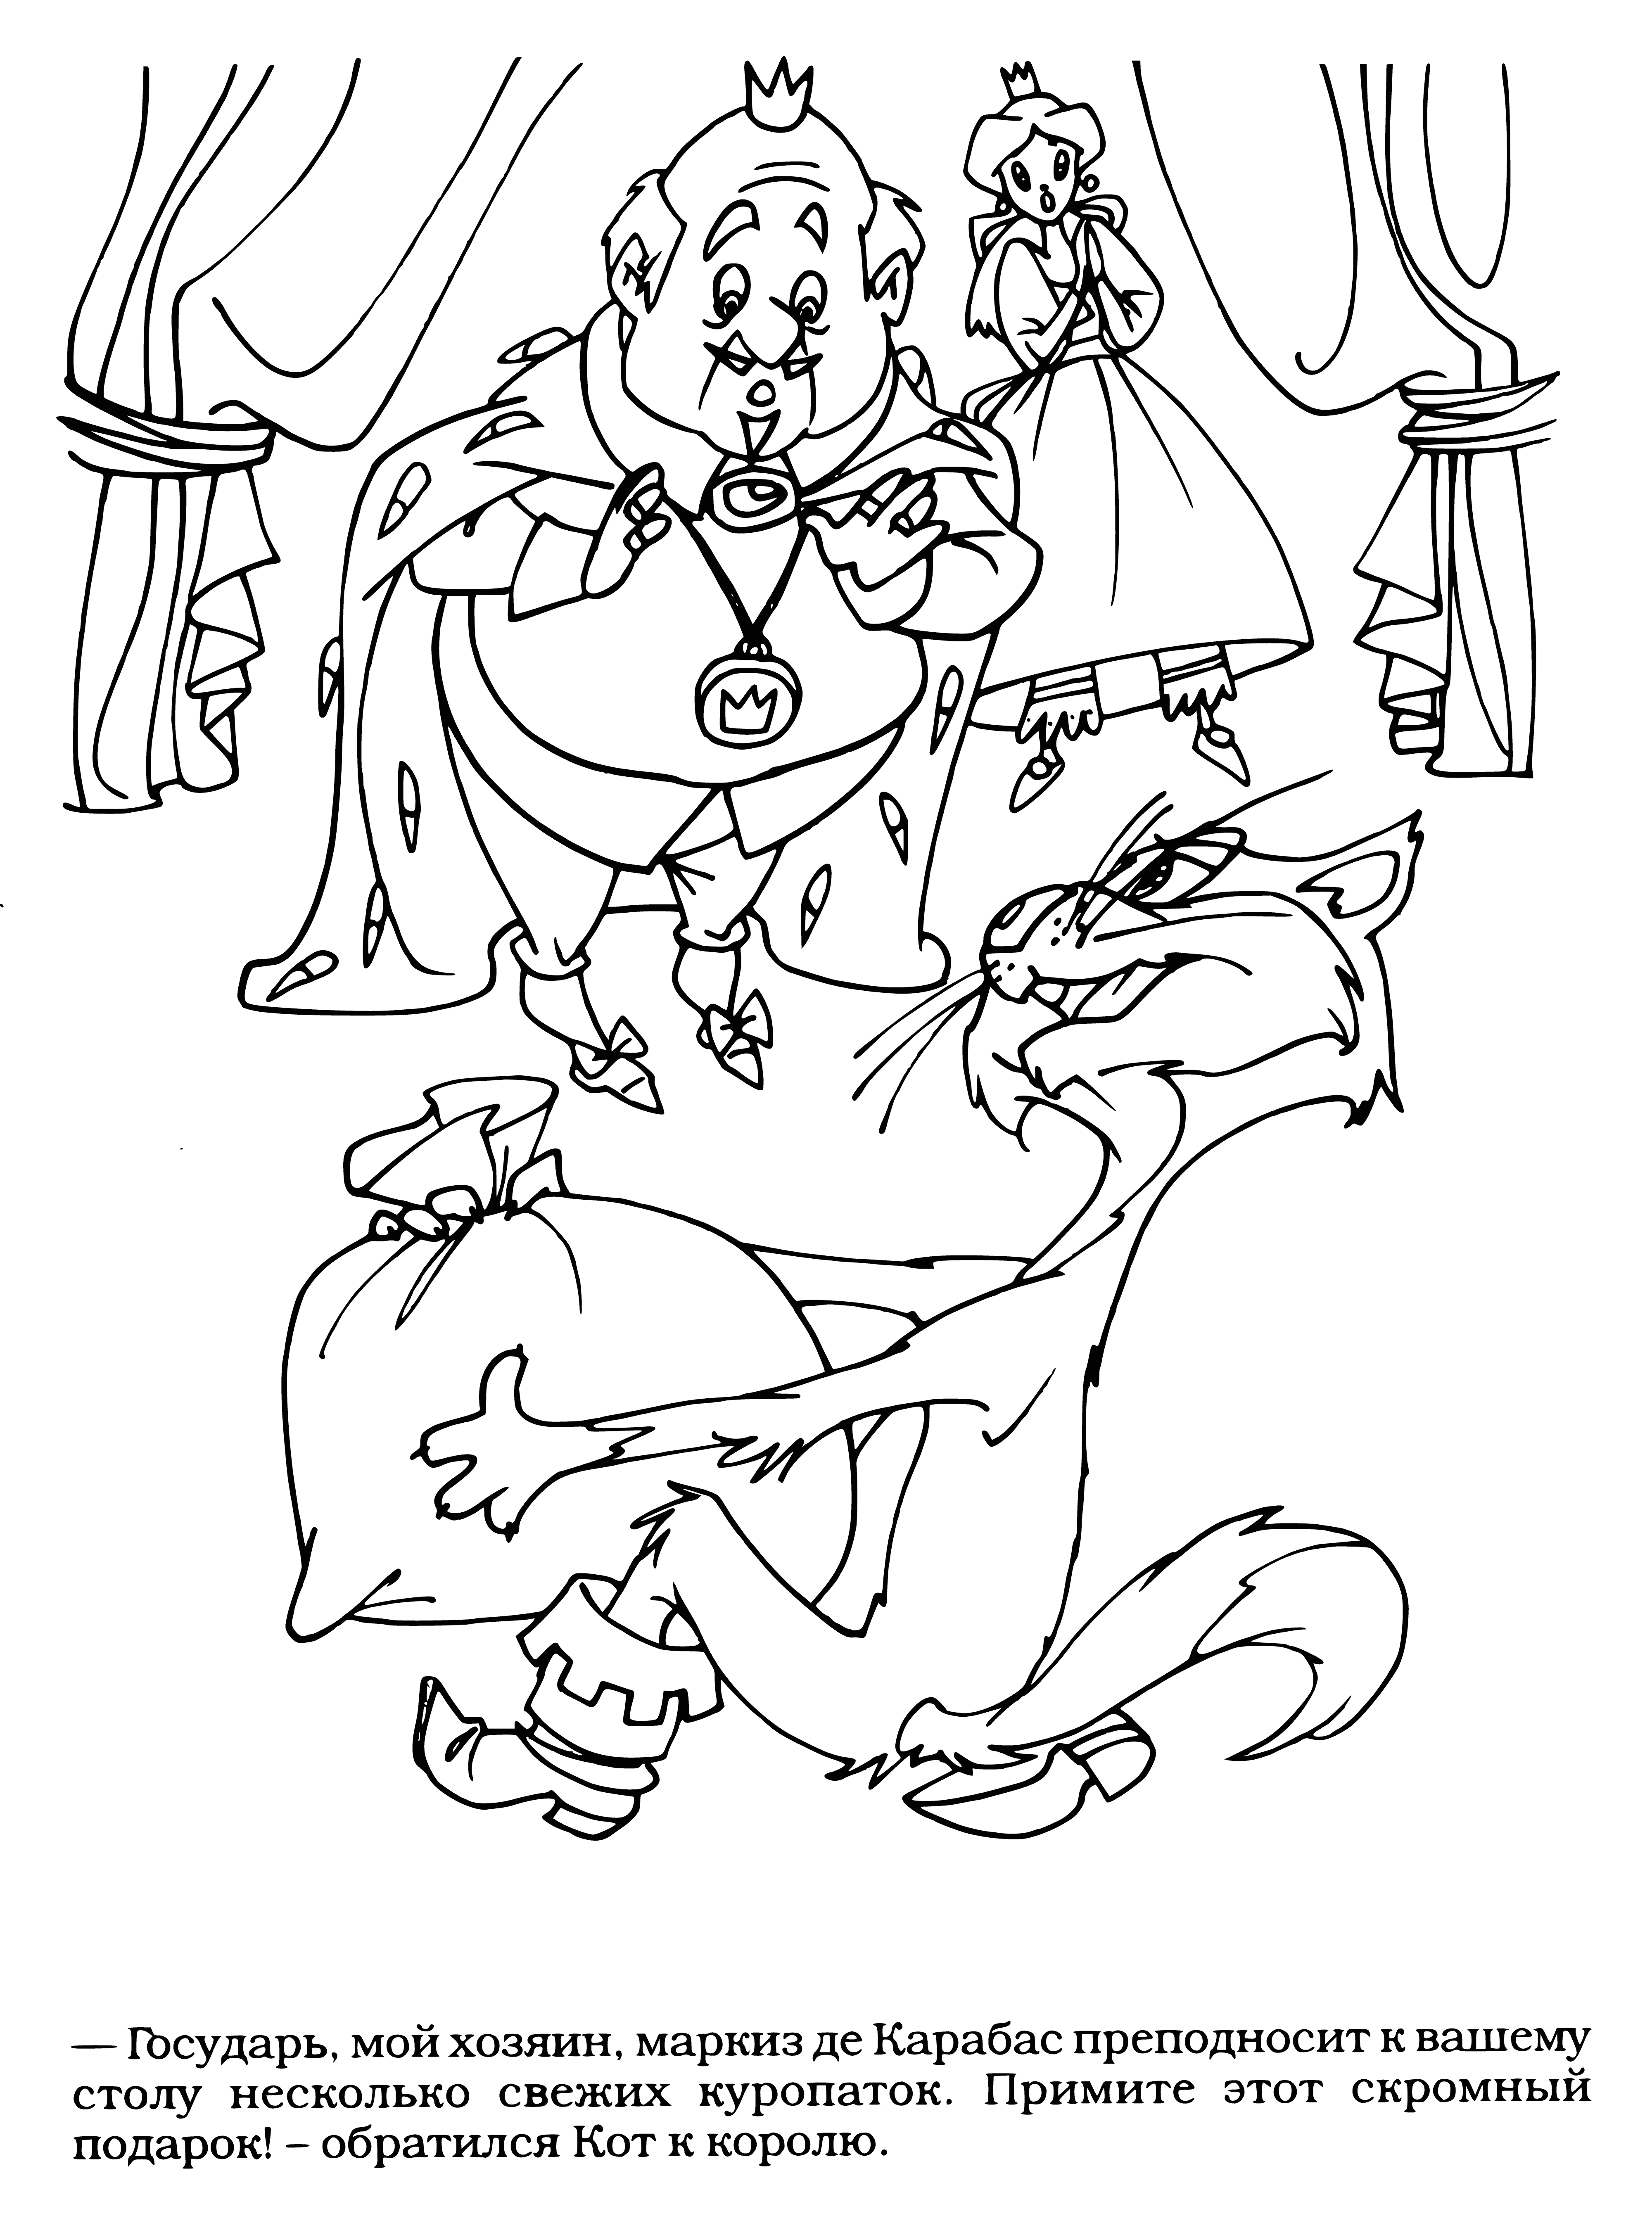 coloring page: Coloring page of partridge in a bag on a table, with two figures – a woman standing, and a man sitting - looking at each other and the bird.